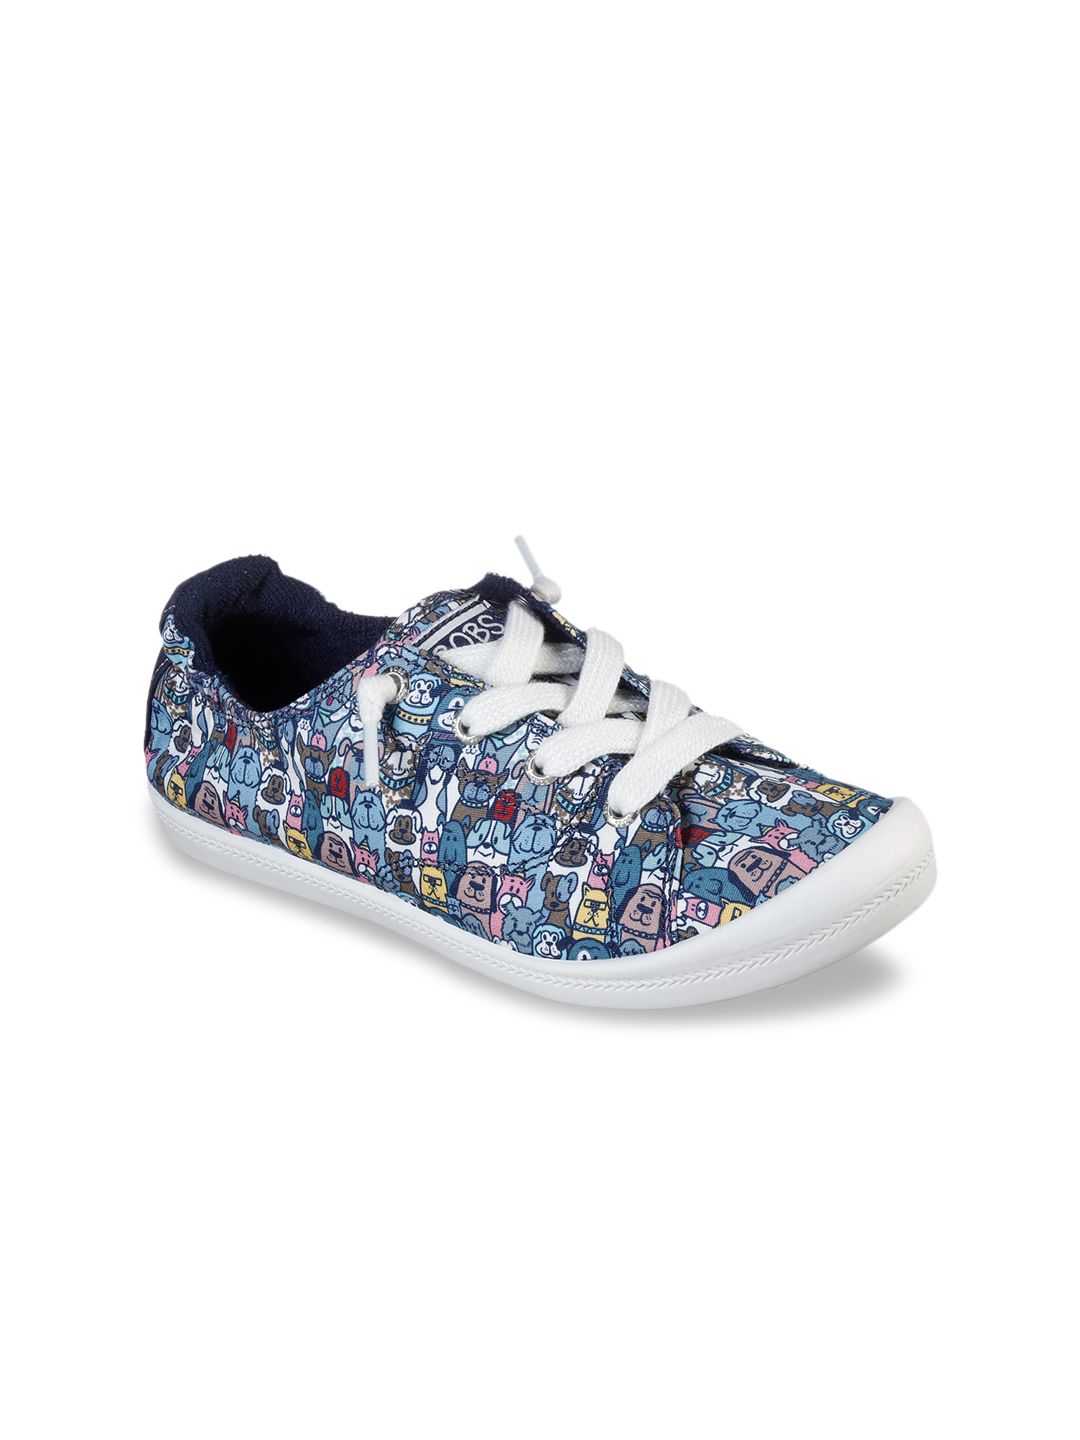 Skechers Women White & Blue Printed Sneakers Price in India